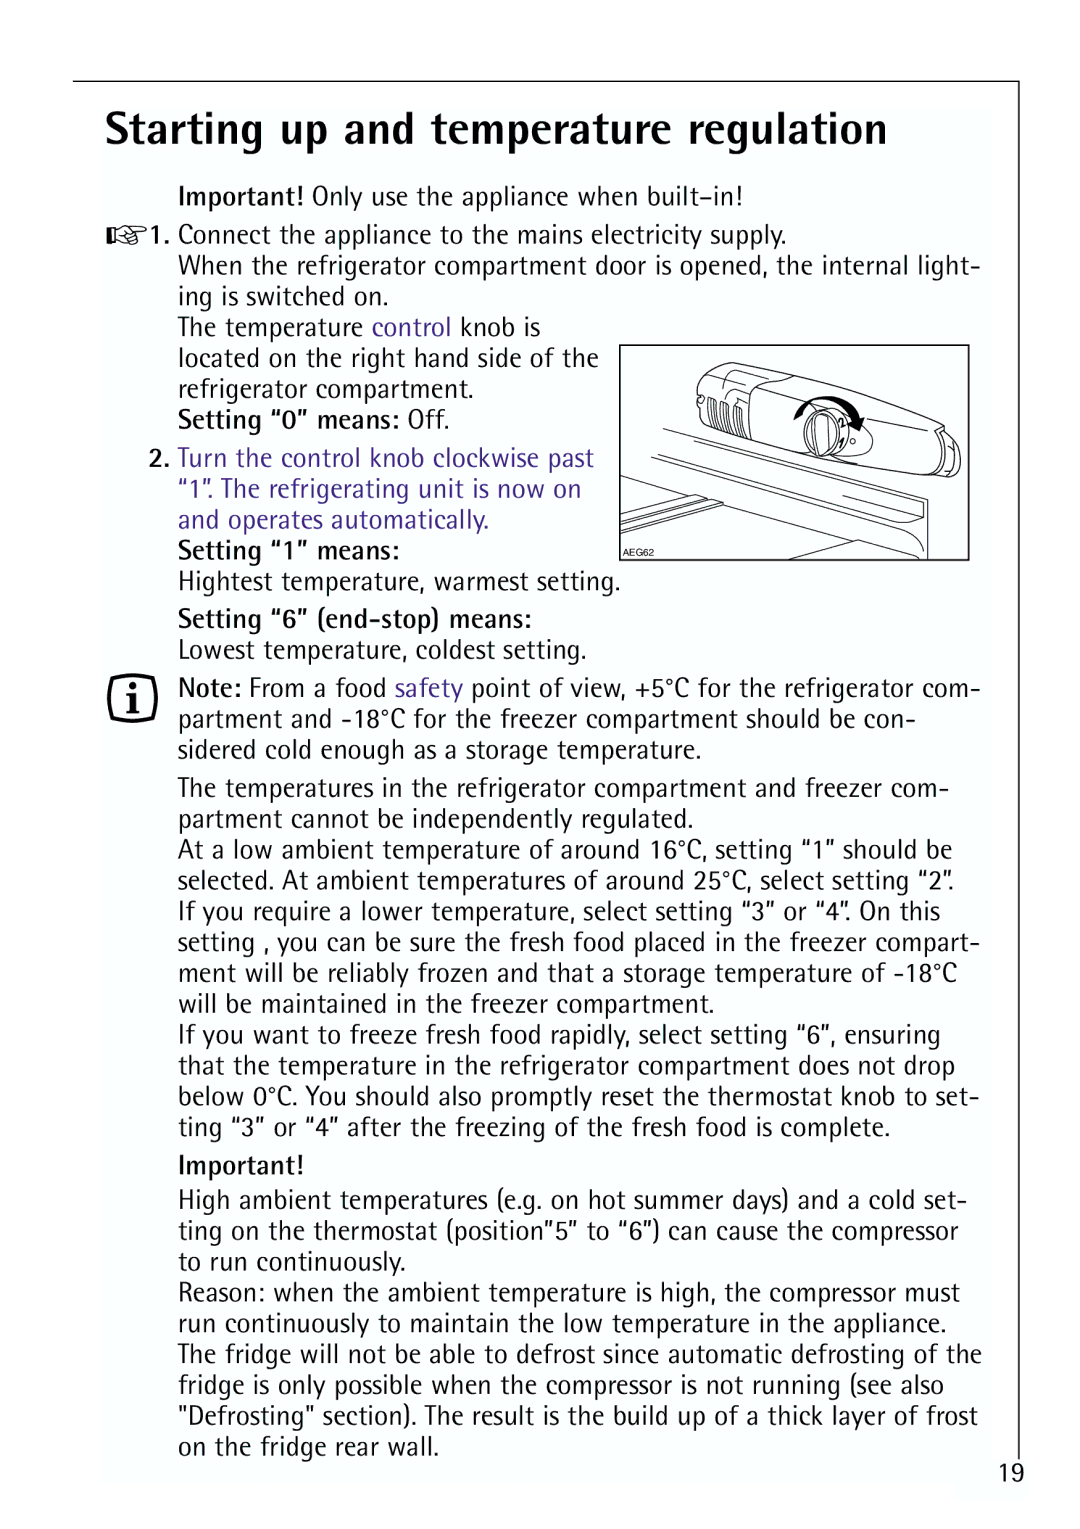 Electrolux U 96040-4 i installation instructions Starting up and temperature regulation, Setting 0 means Off 